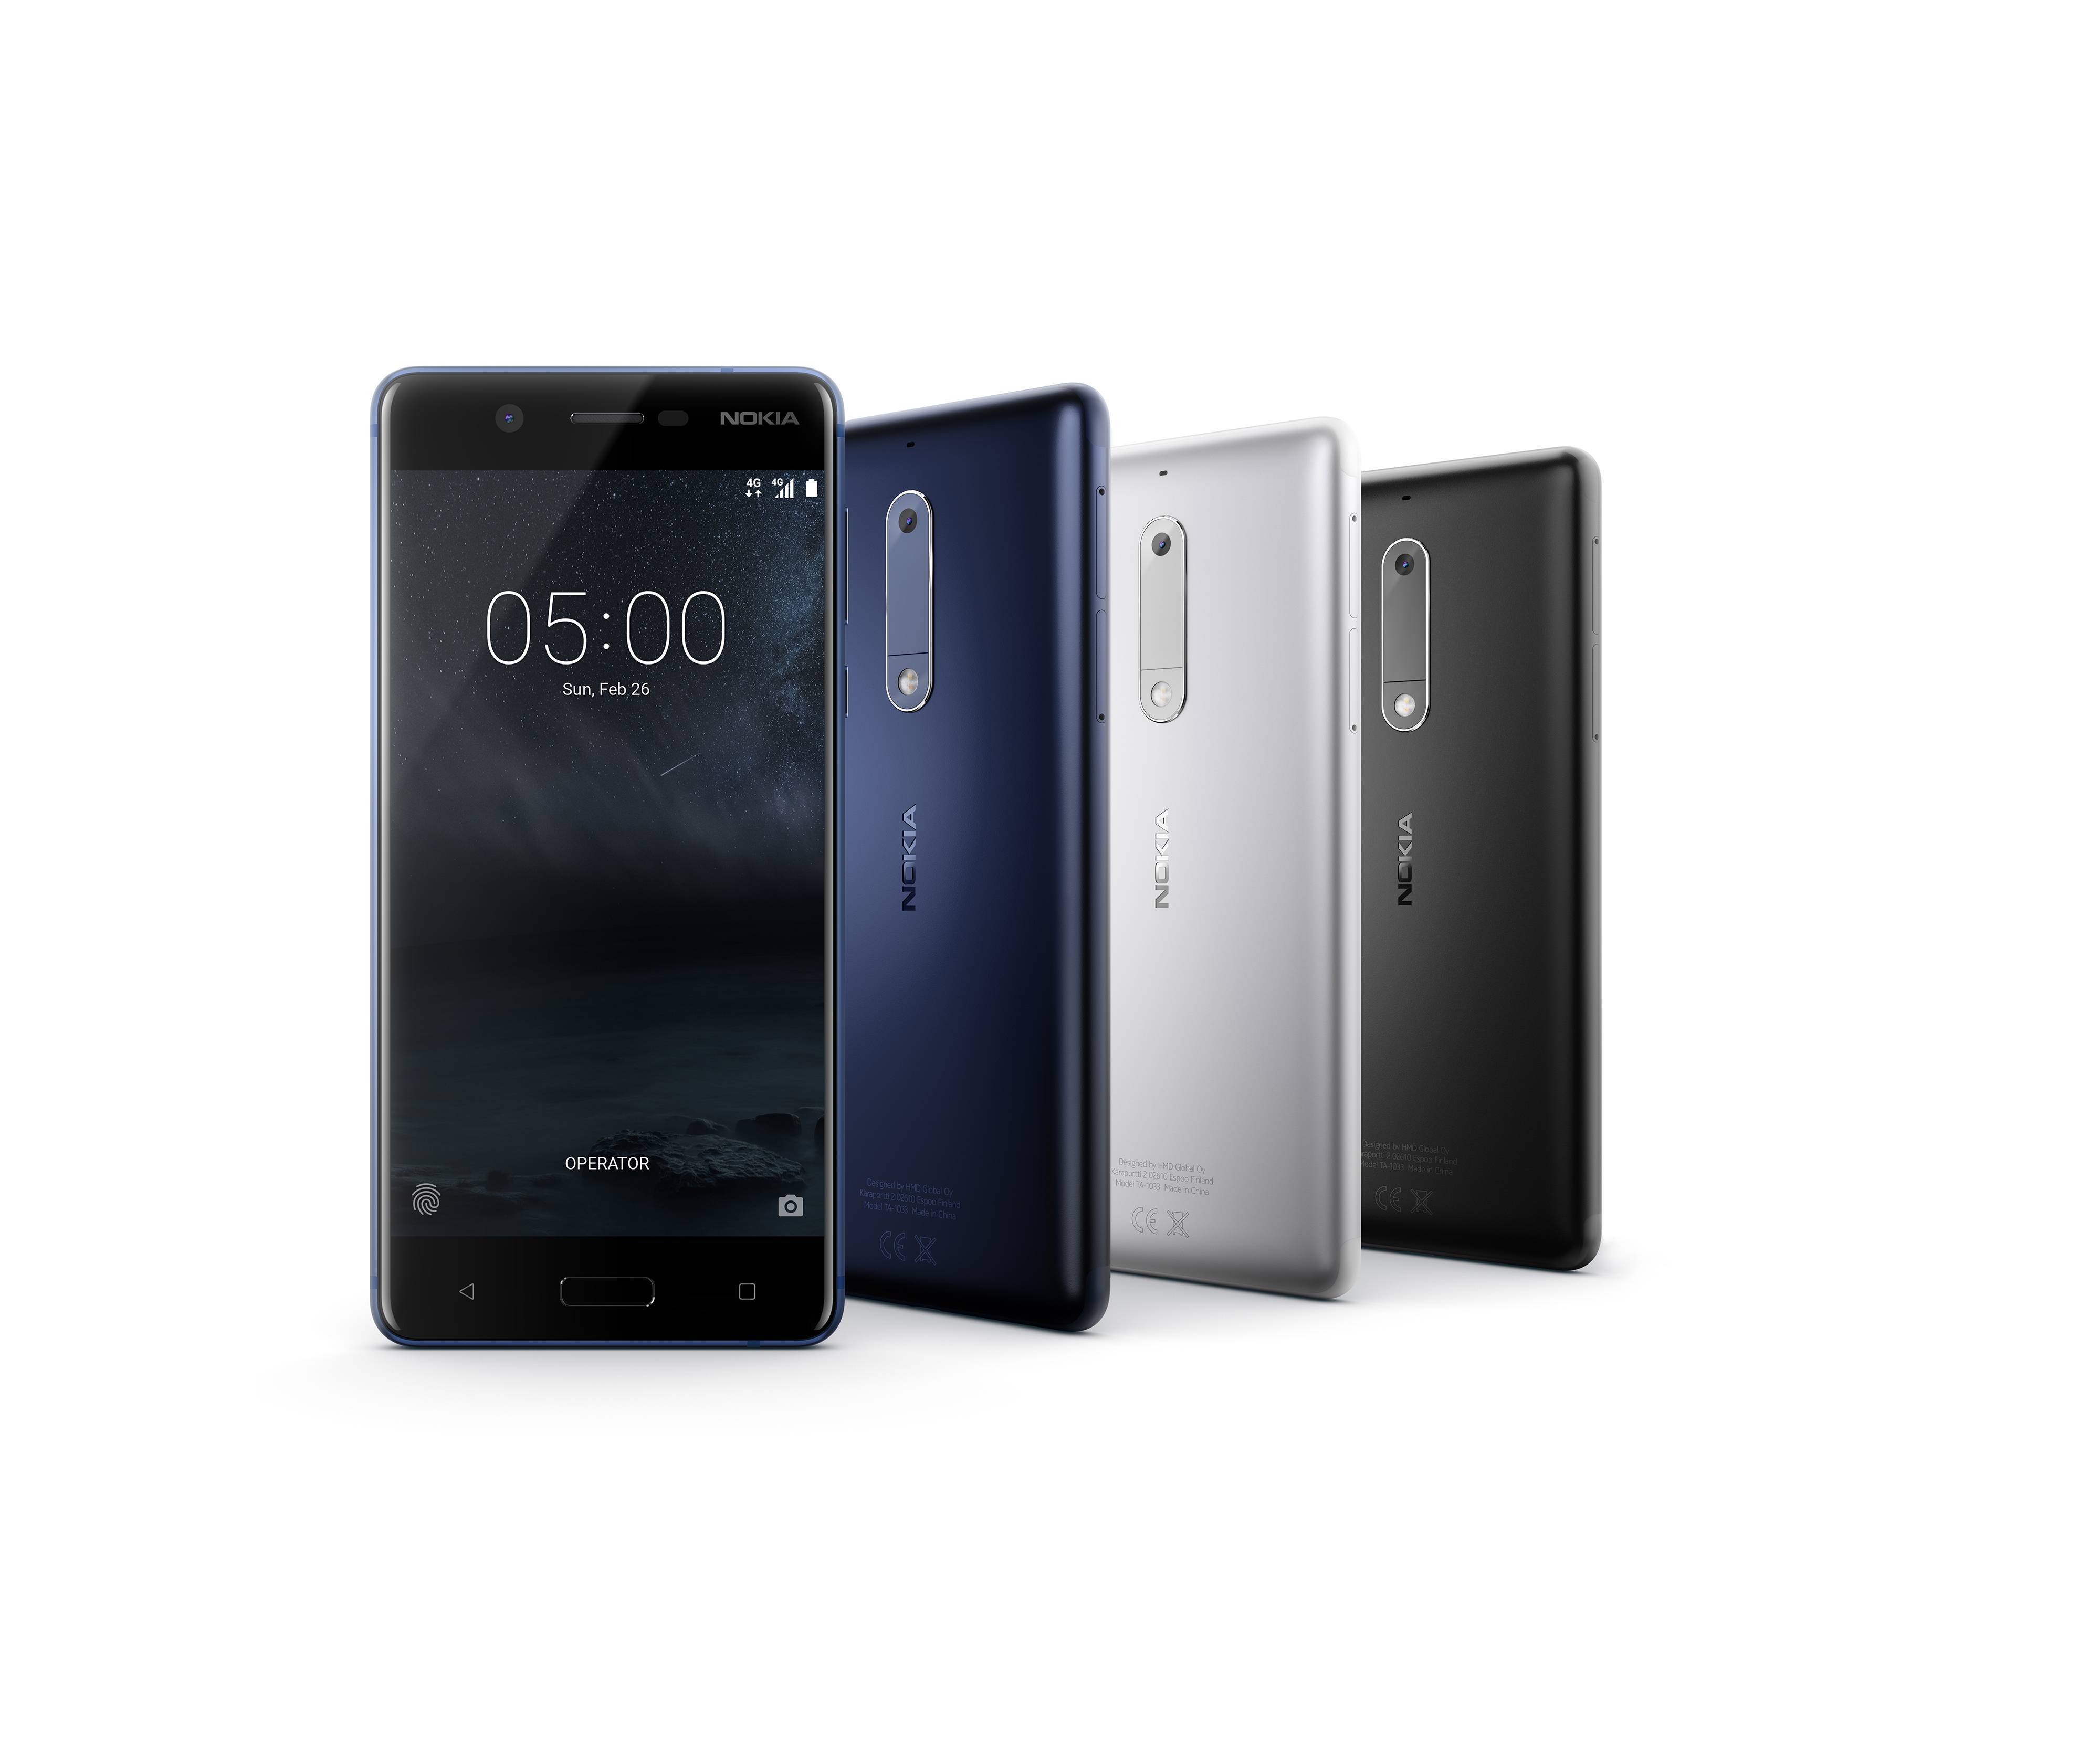 Nokia 5 Now Available For Purchase In Pakistan